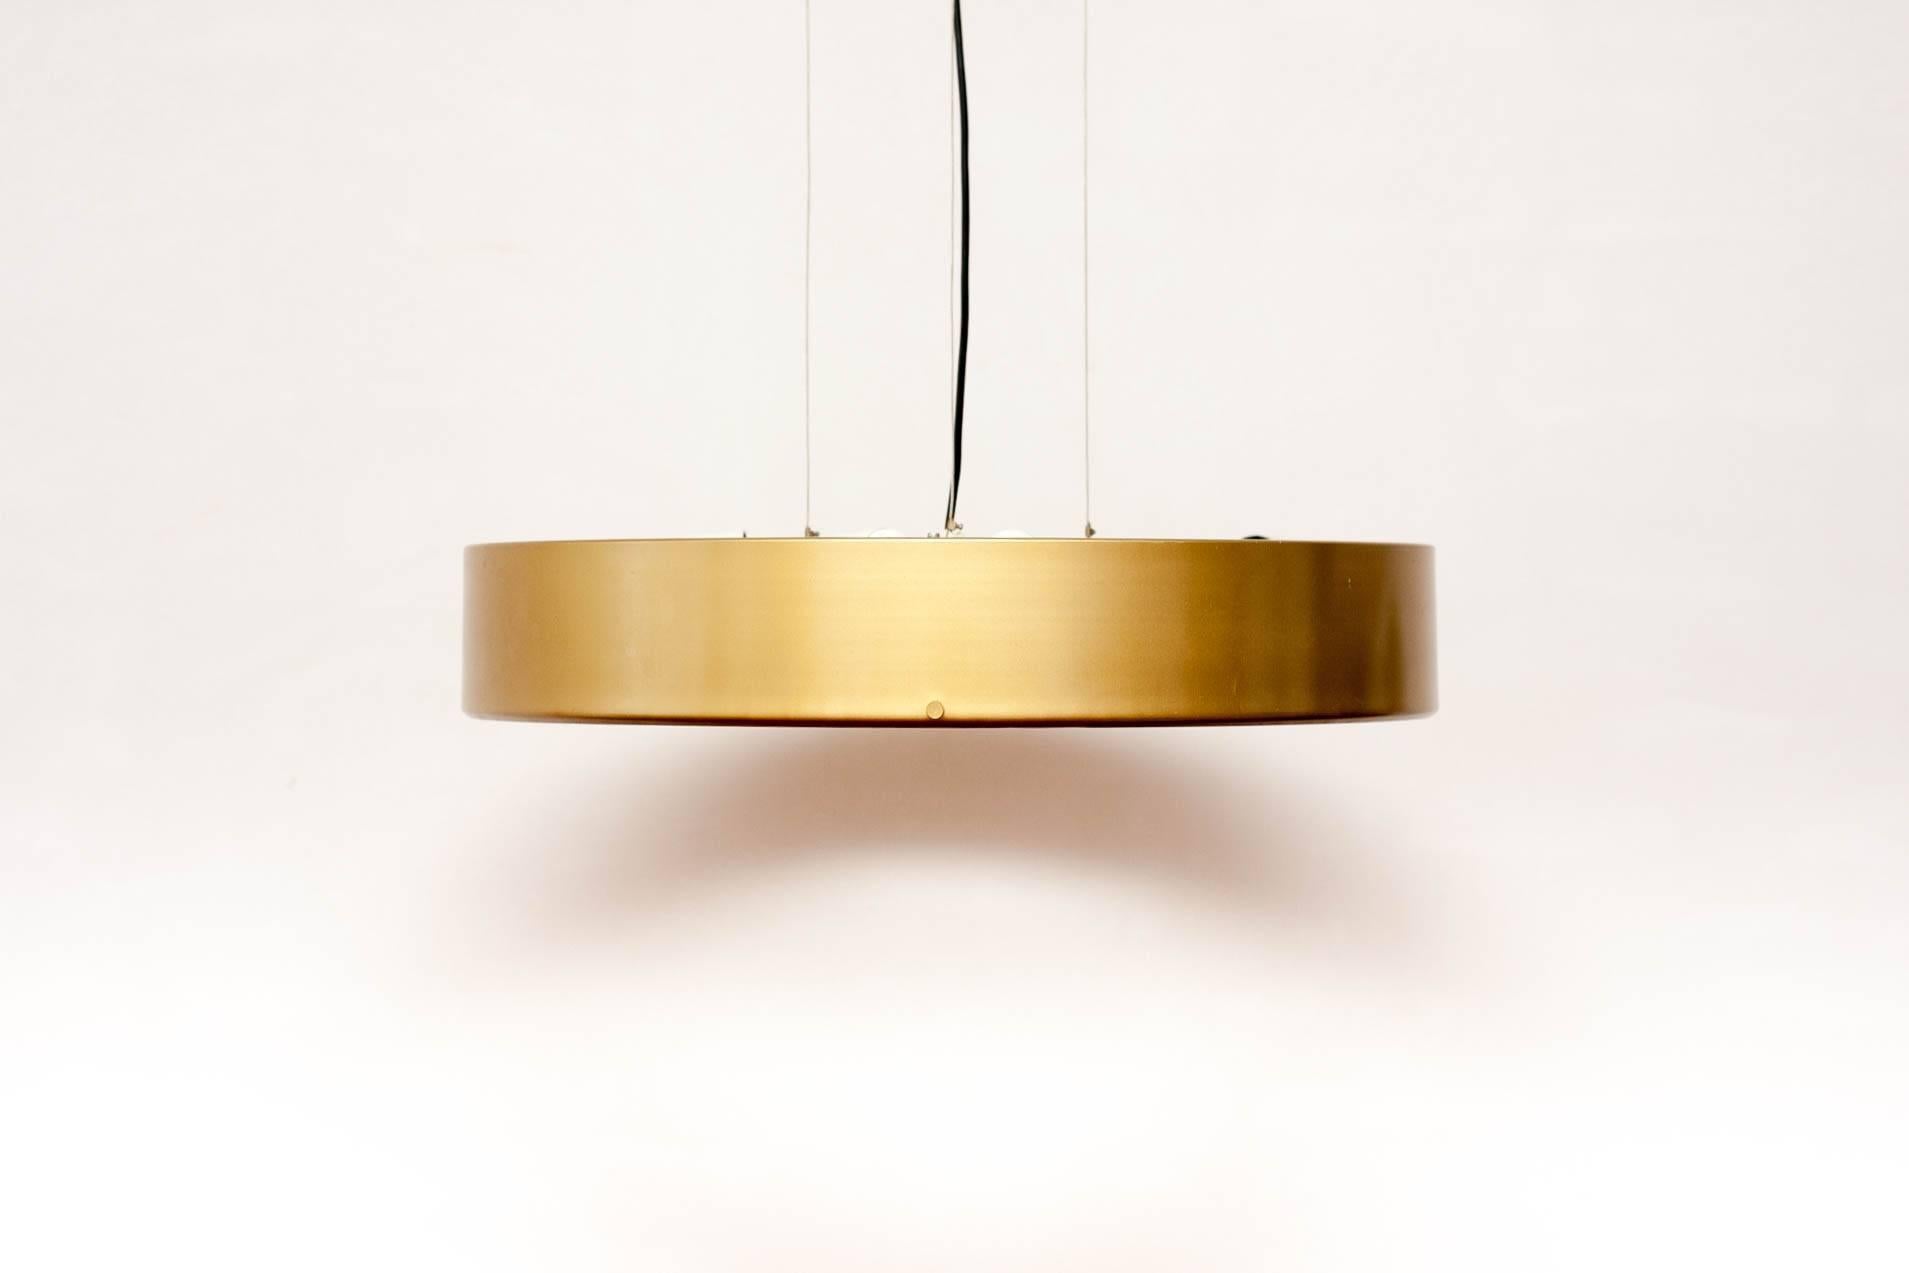 Large pendant light designed by Stilnovo founder Bruno Gatta, 1959. Rare original golden color. The lamp is suspended from a ceiling plate by three metal wires each which can be adjusted to change height and each pendant lamp holds six armatures.

  